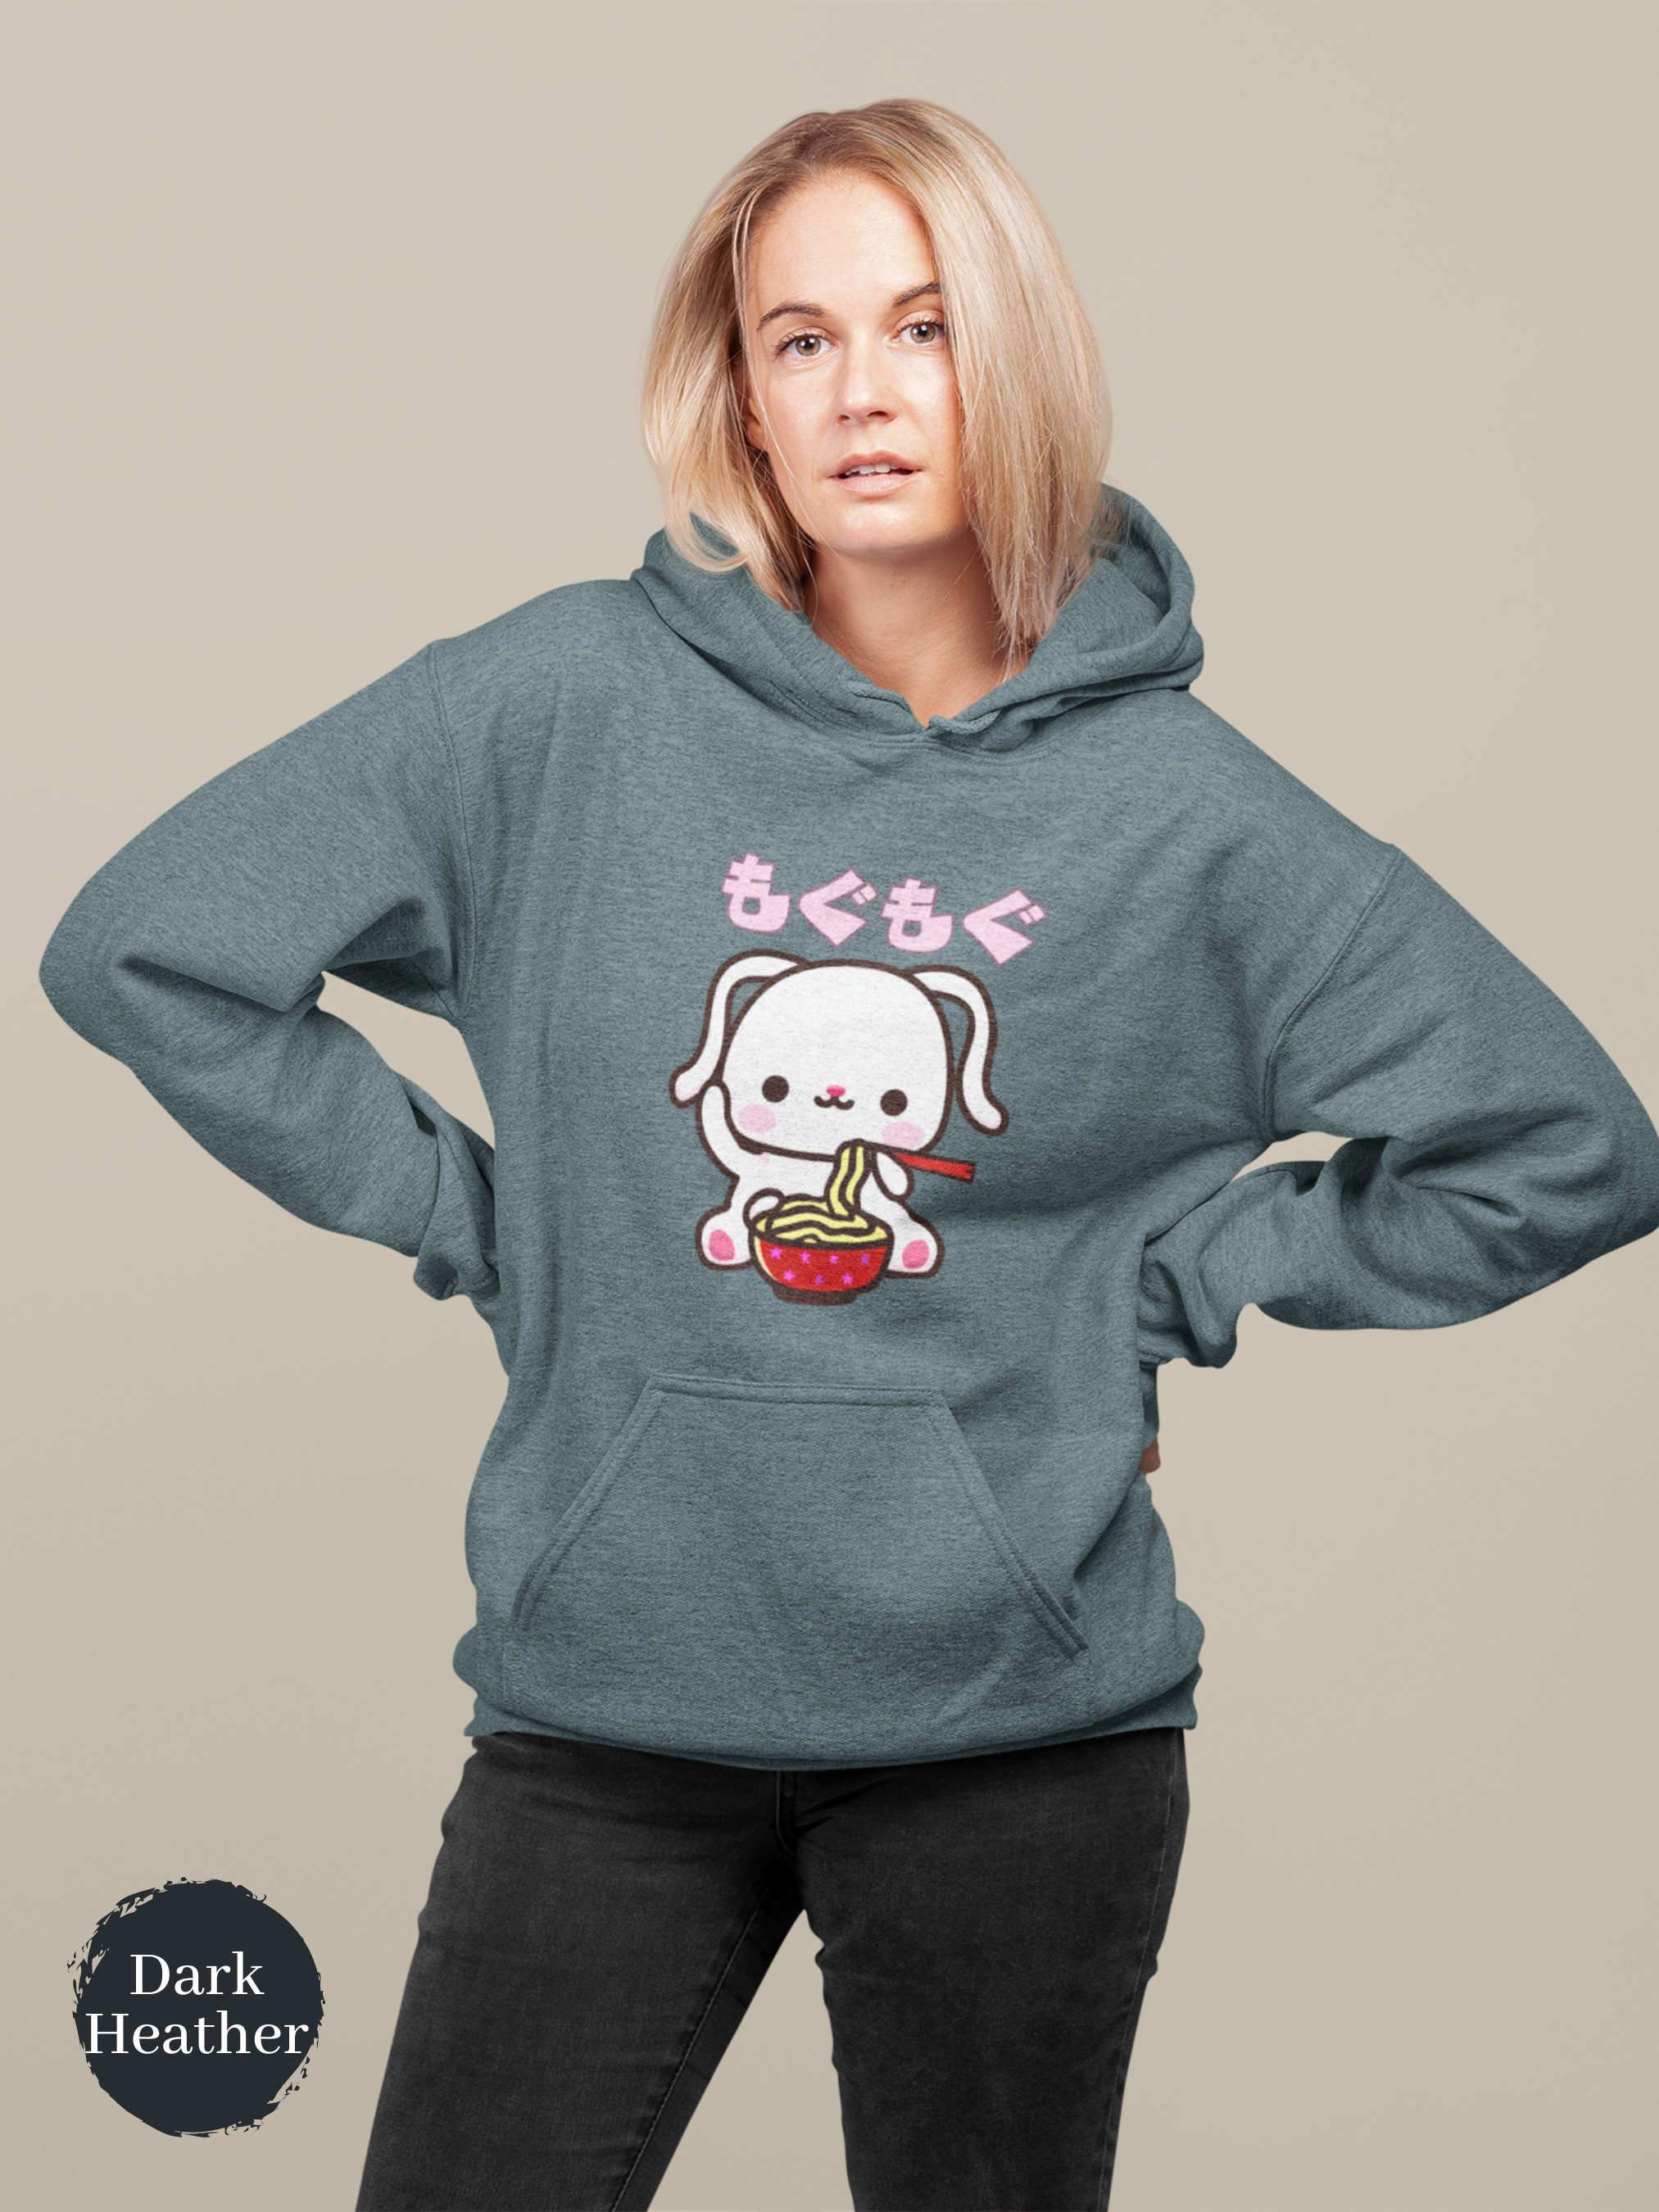 Ramen Hoodie Bunny with Adorable Ramen Art: Perfect for Foodie and Asian Food Lovers "Mogu Mogu"